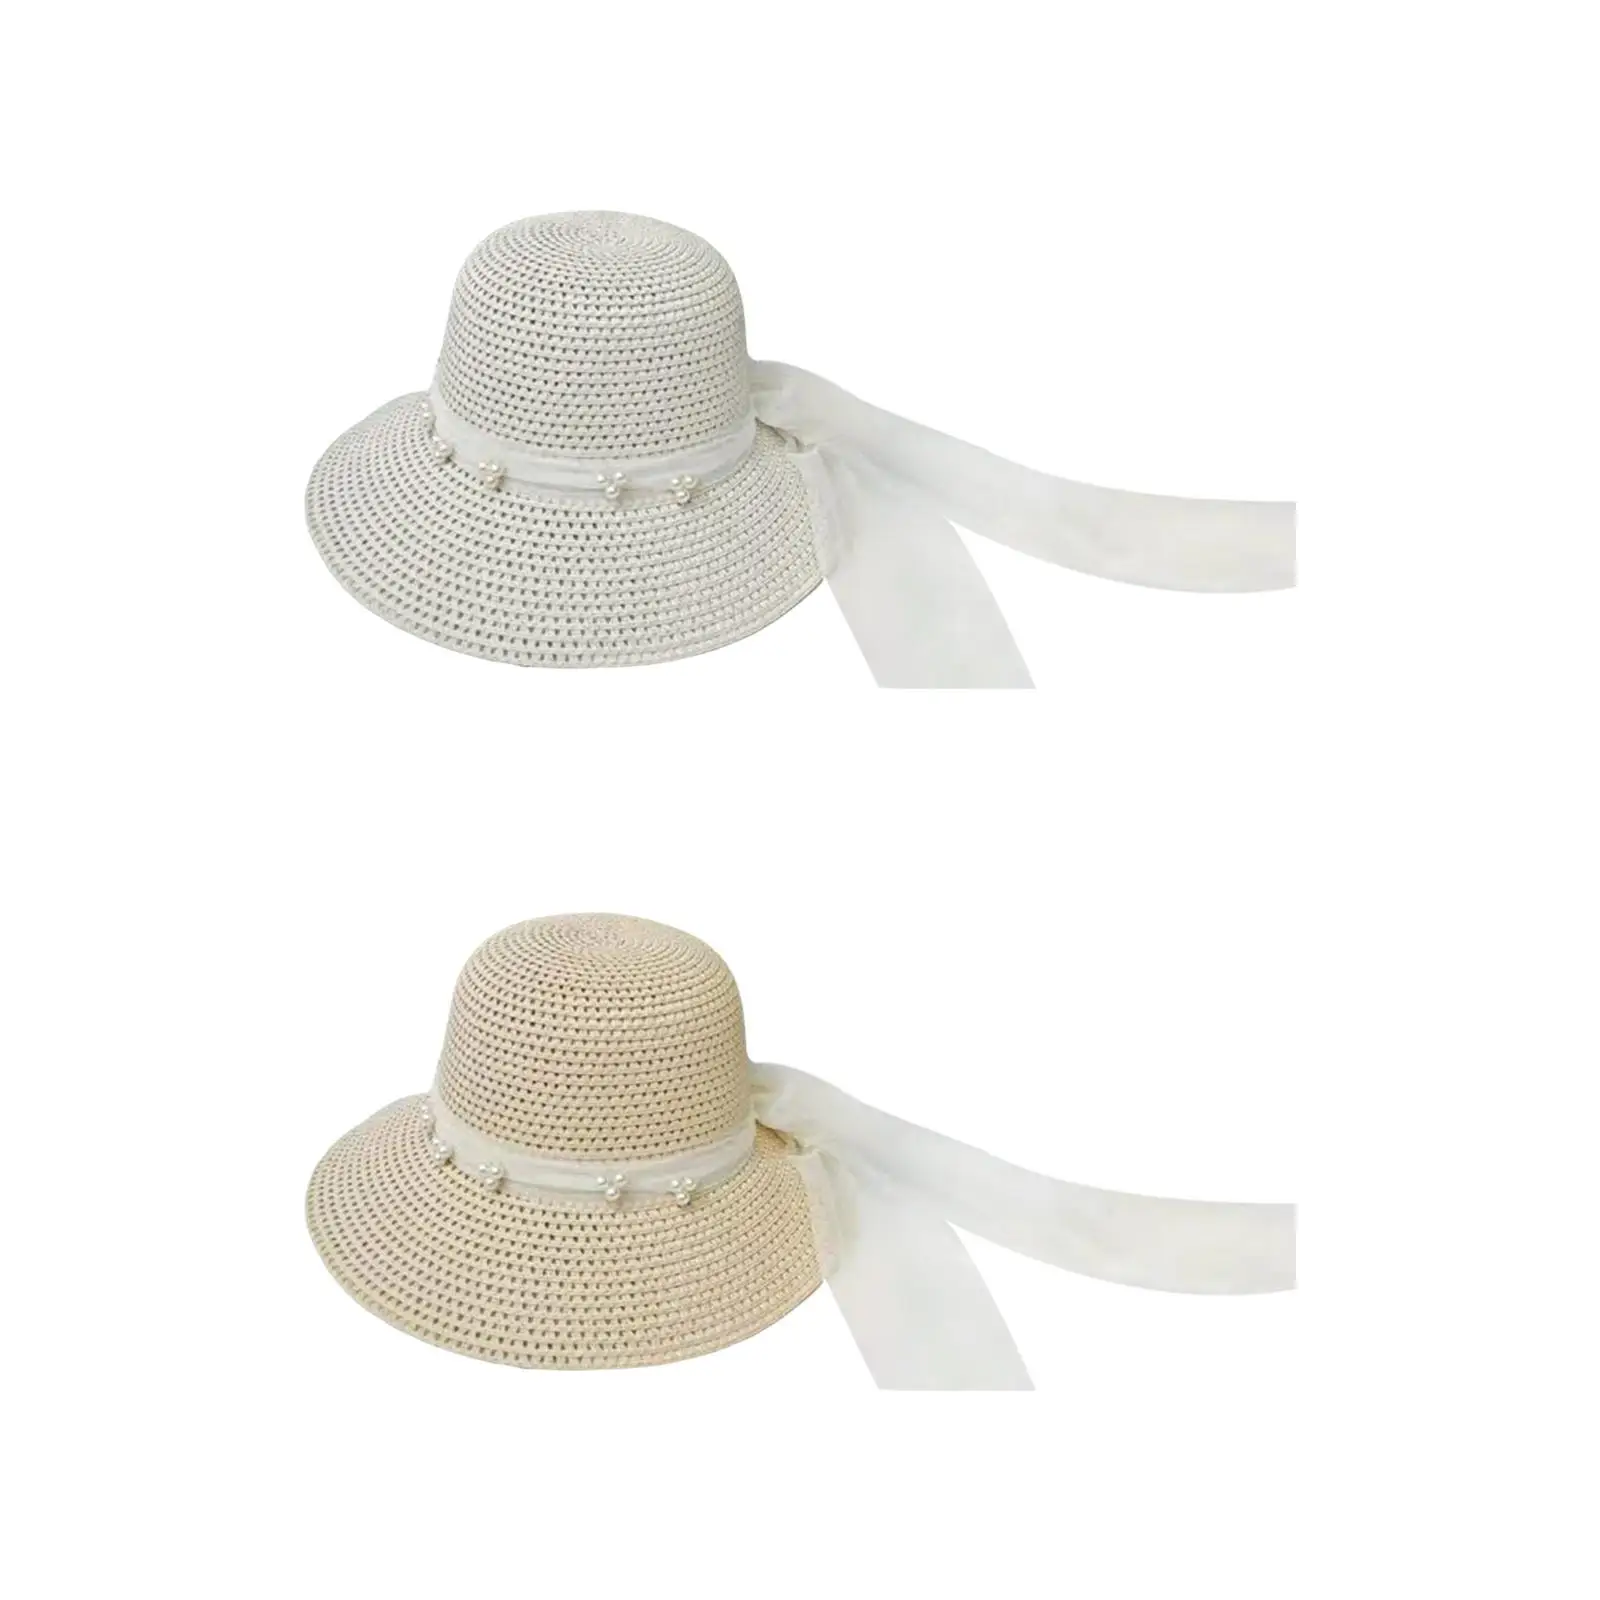 Womens Straw Hats Summer Beach Hat Breathable Ladies Fashion Packable Wide Brim Visor Hats for Festival Vacation Travel Outdoor